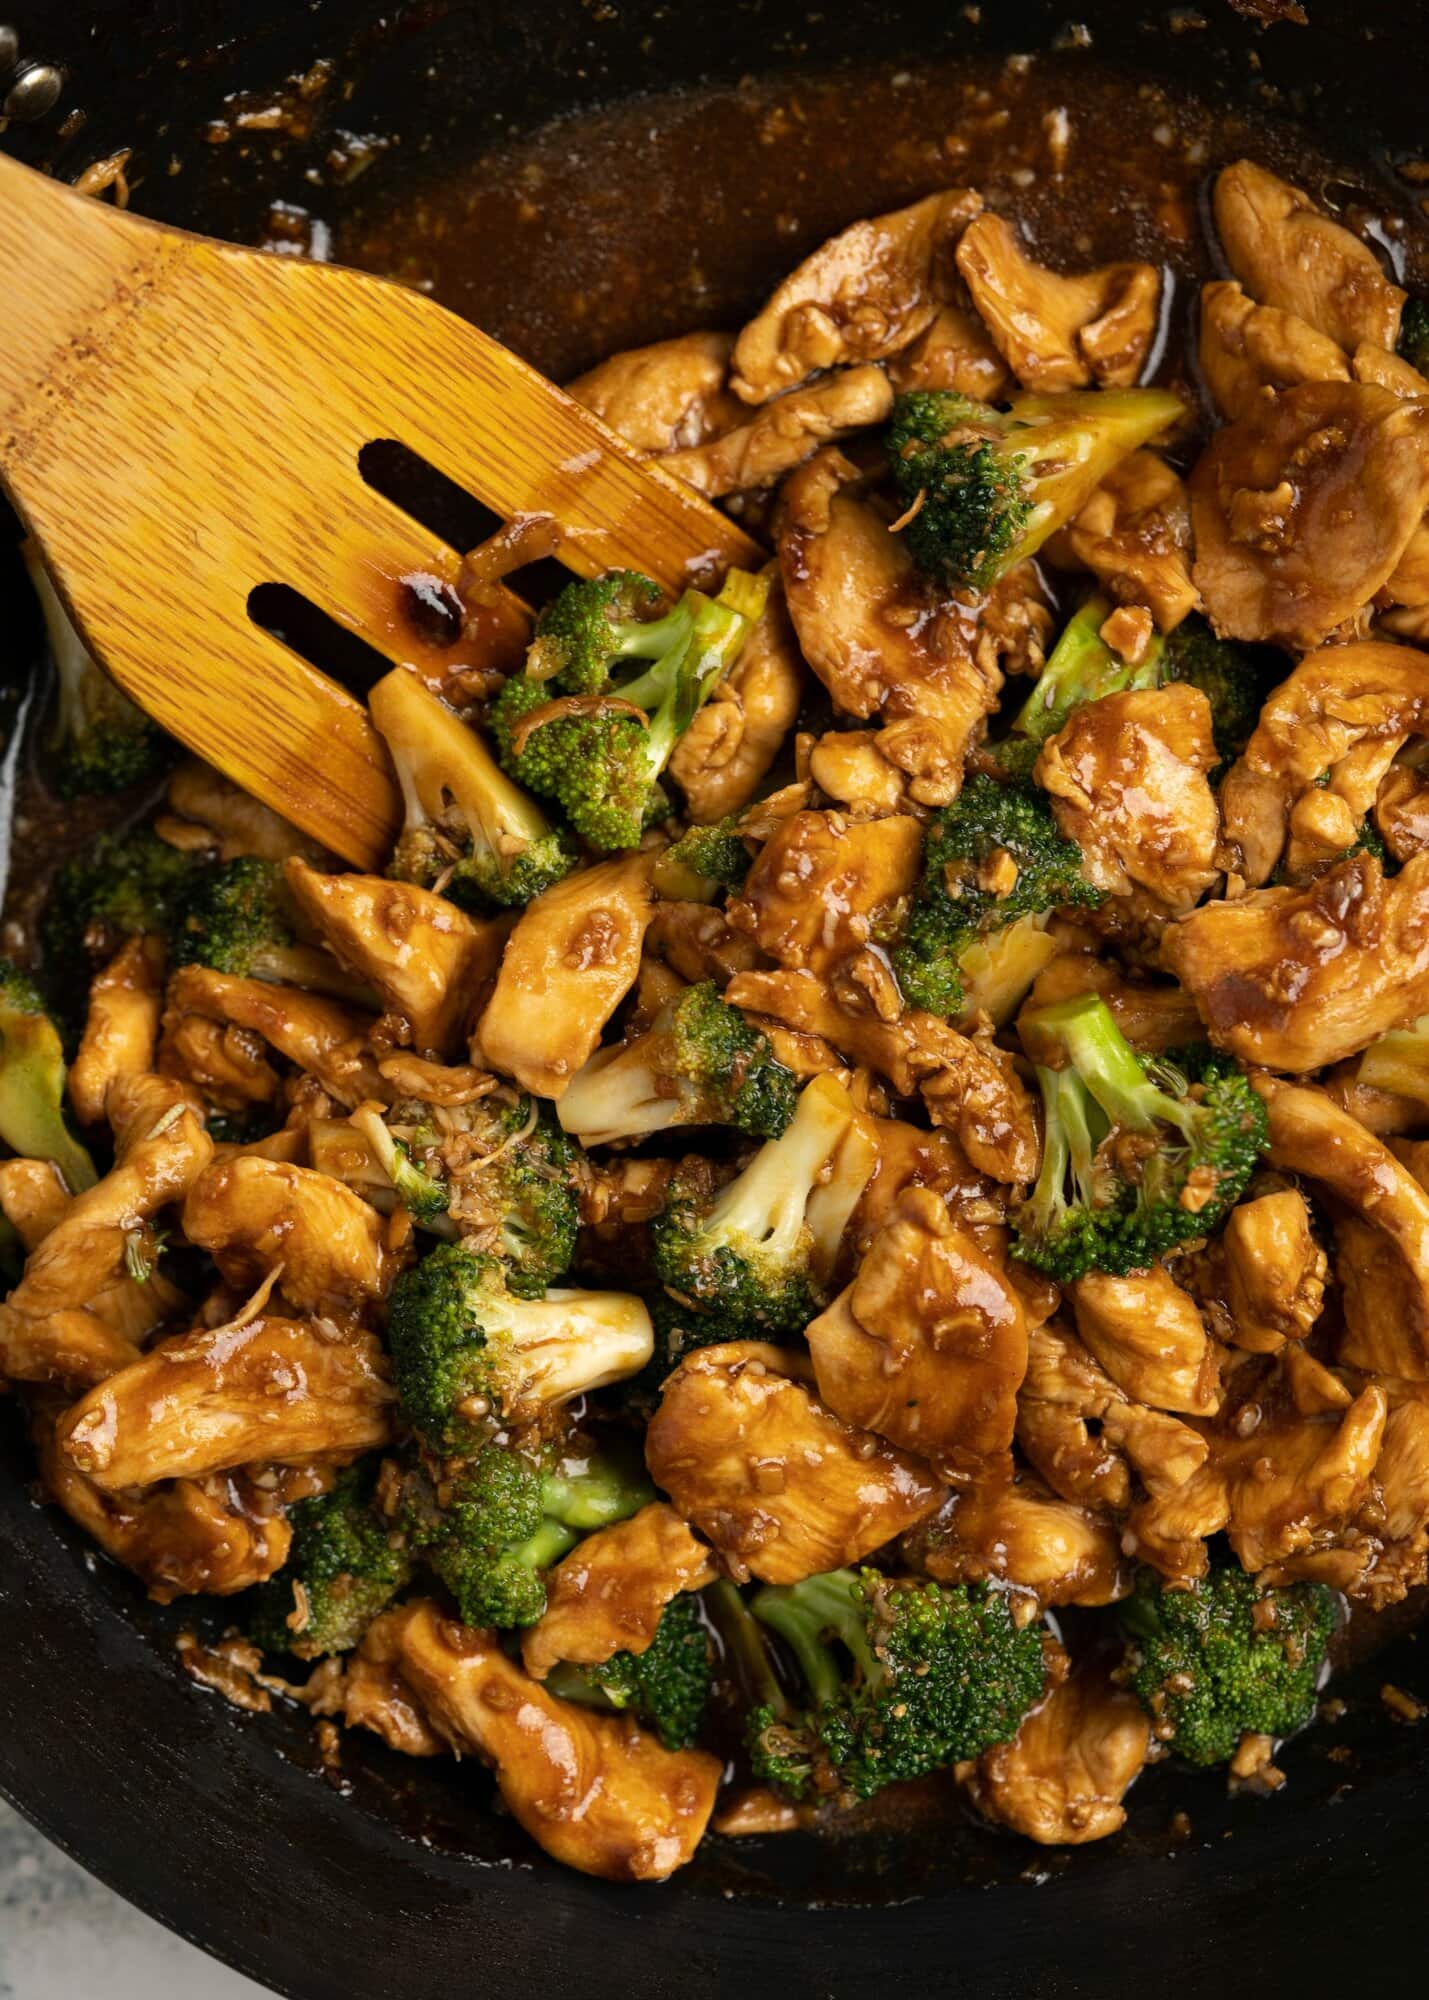 This take-out style Chicken Broccoli Stir Fry in a savory Asian sauce is an easy 30-minute recipe, worth adding to your weekday dinner menu. 